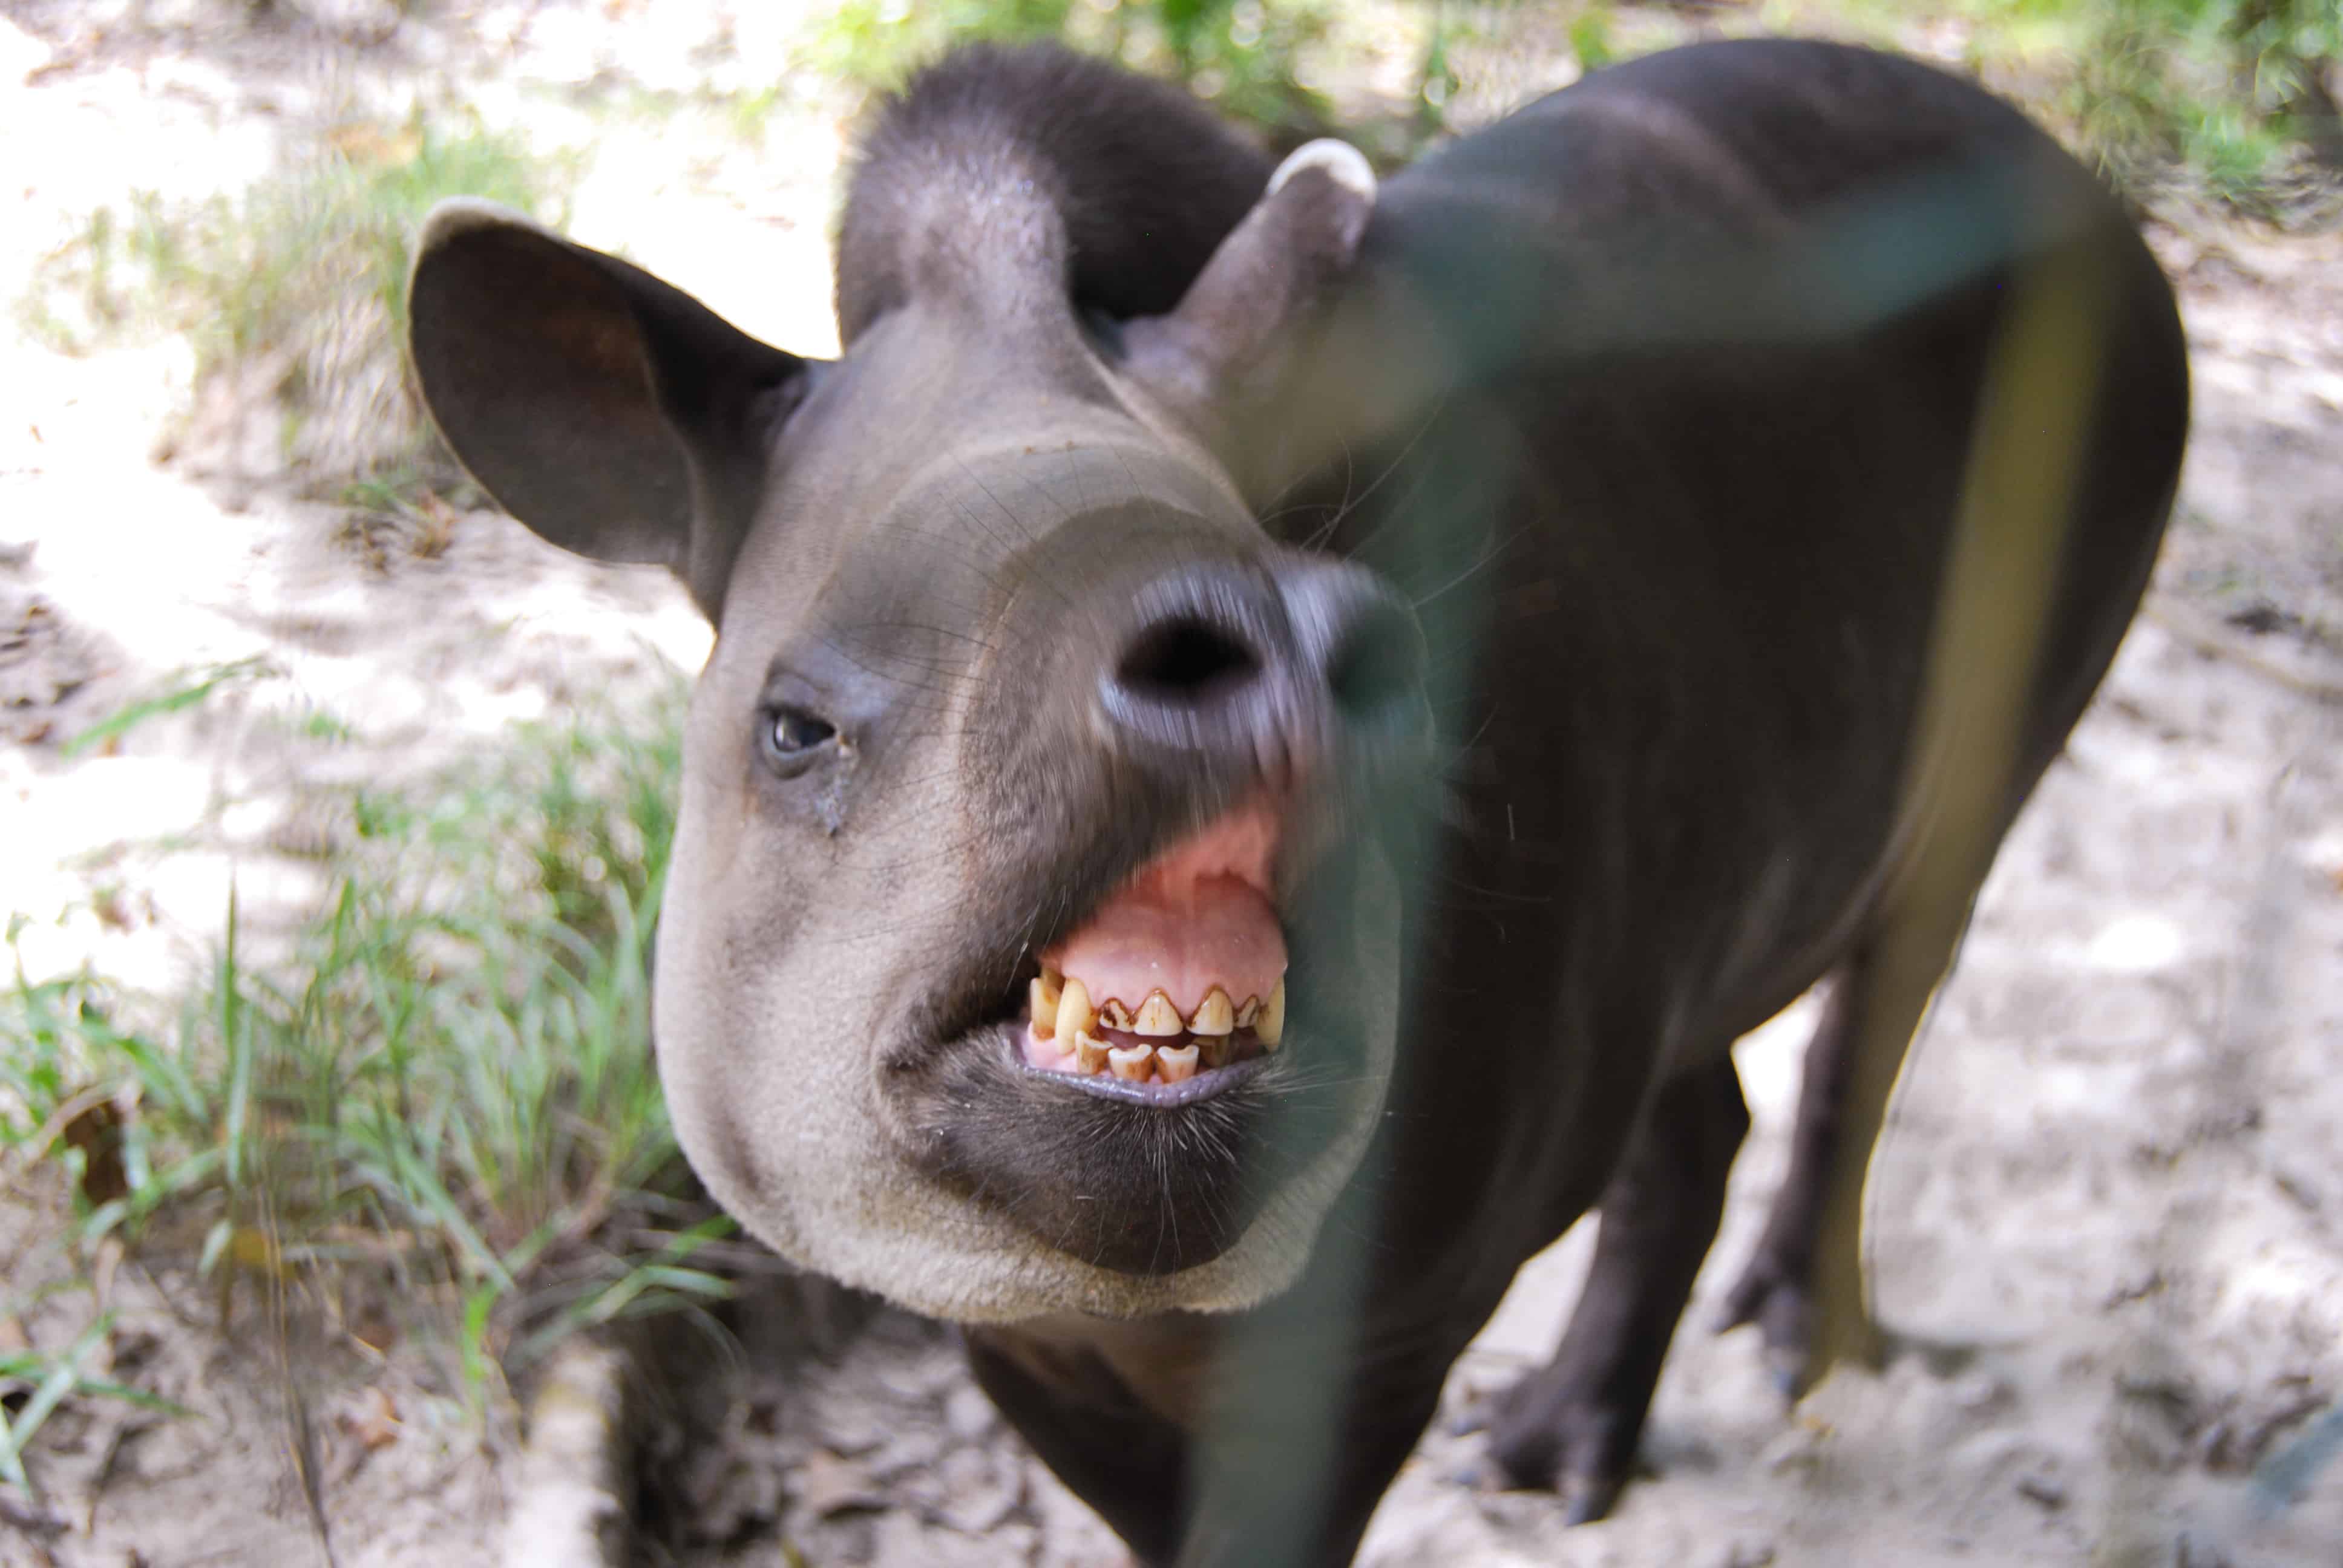 A photograph of a tapir center frame smiling at the camera. Its teeth need to be cleaned.